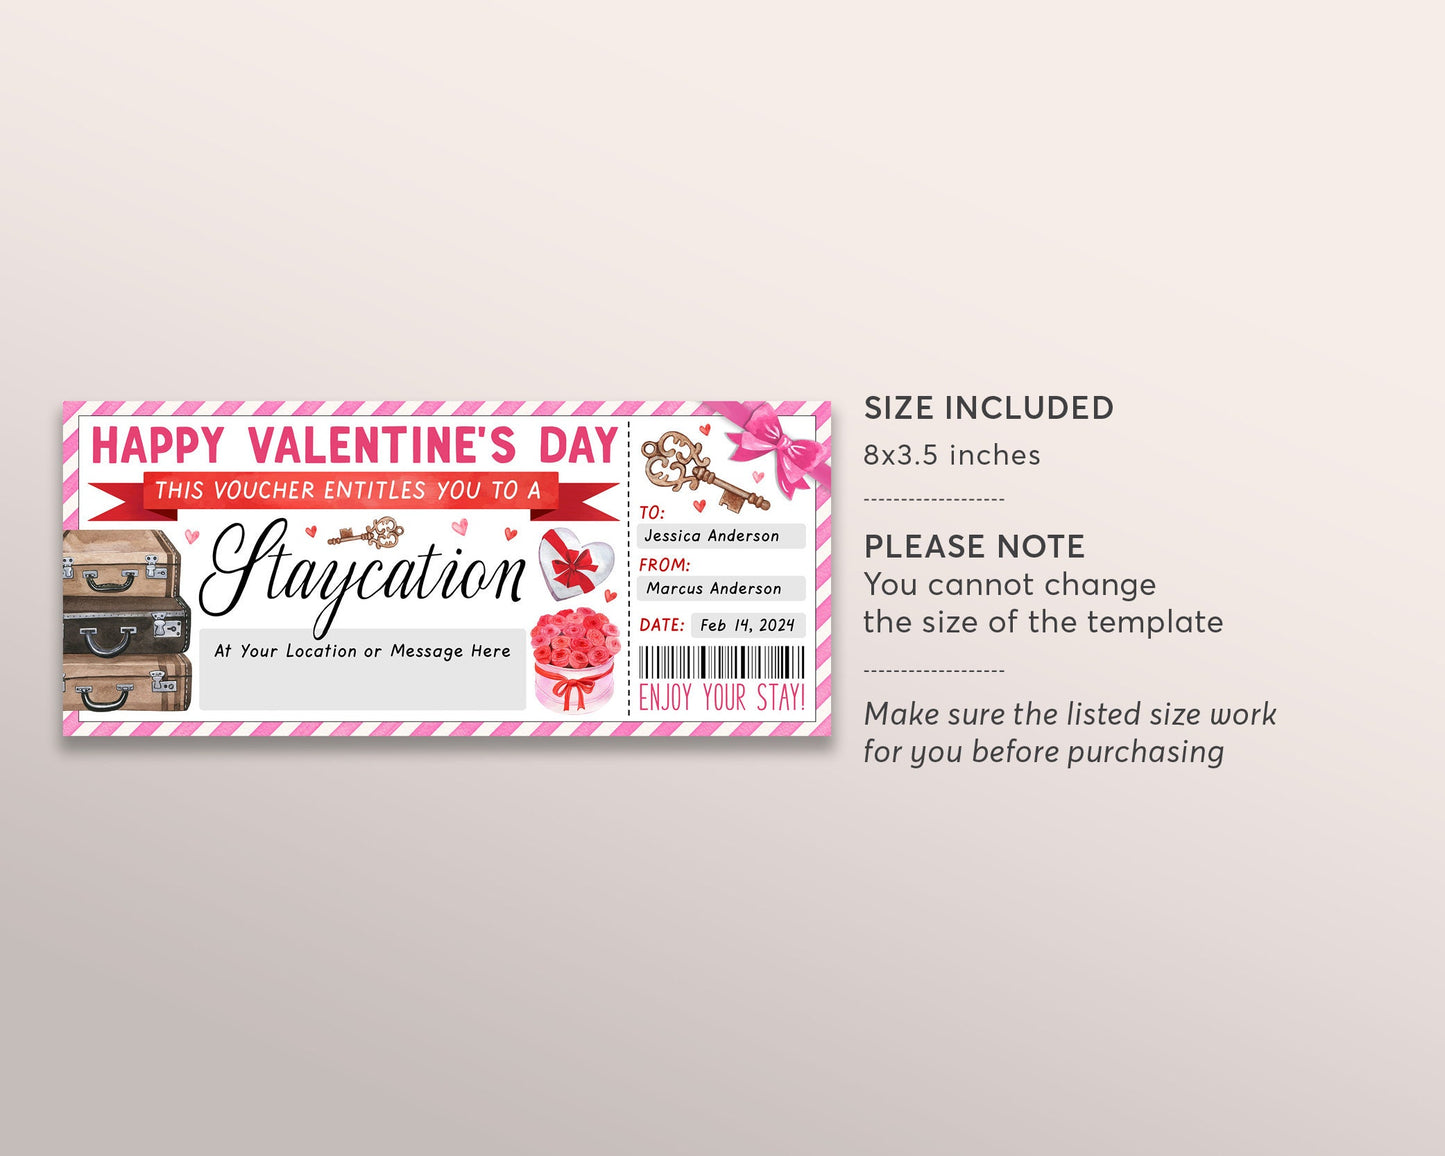 Valentines Day Staycation Voucher Editable Template, Surprise Weekend Getaway Hotel Ticket Gift Certificate Reveal, Hotel Reservation